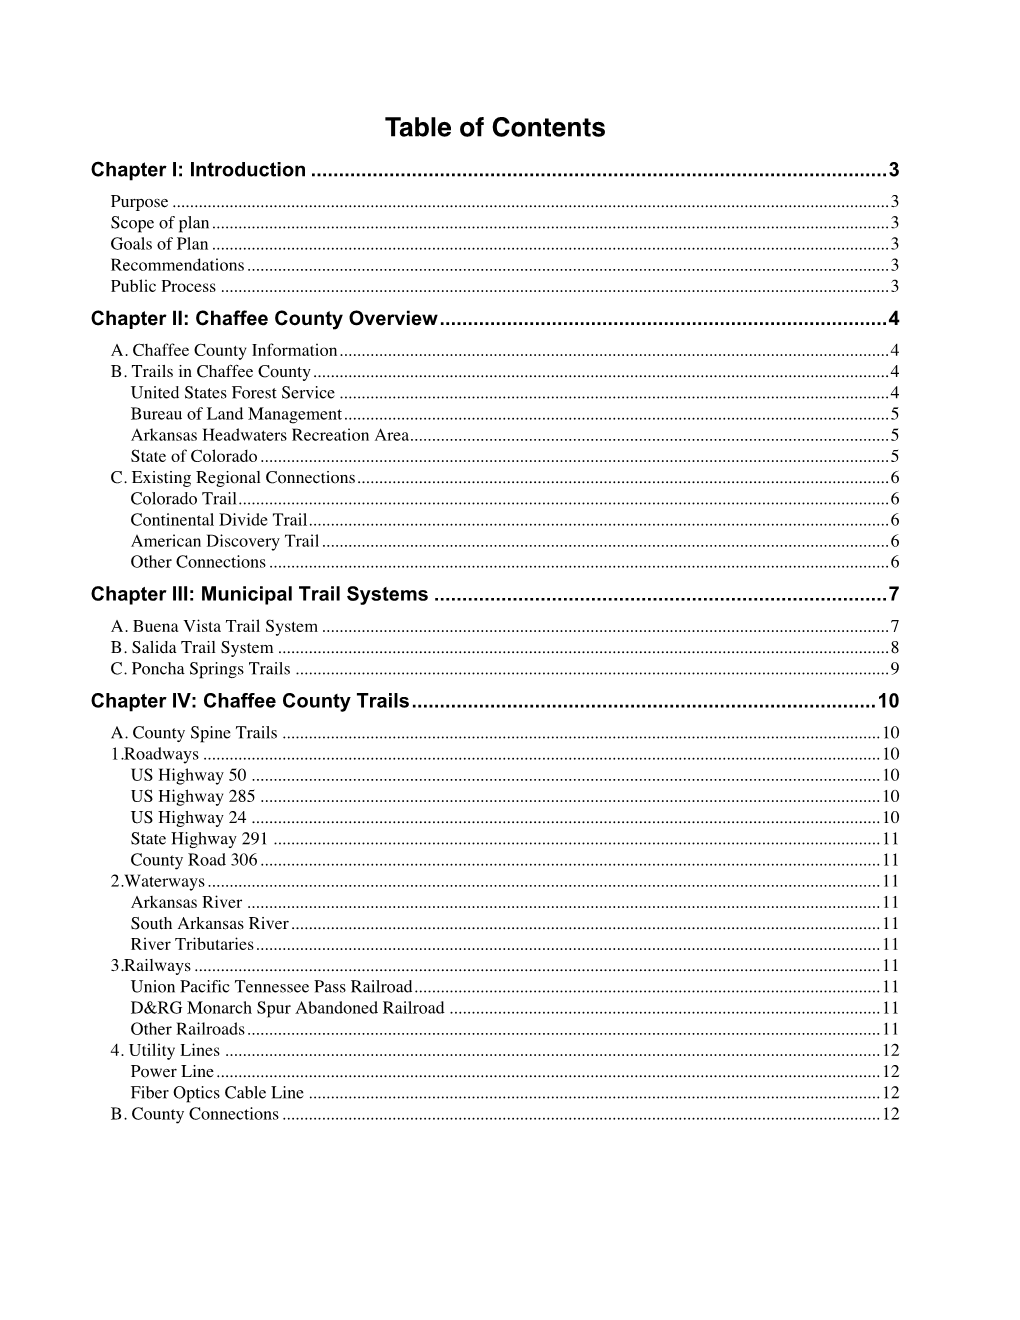 Table of Contents Chapter I: Introduction